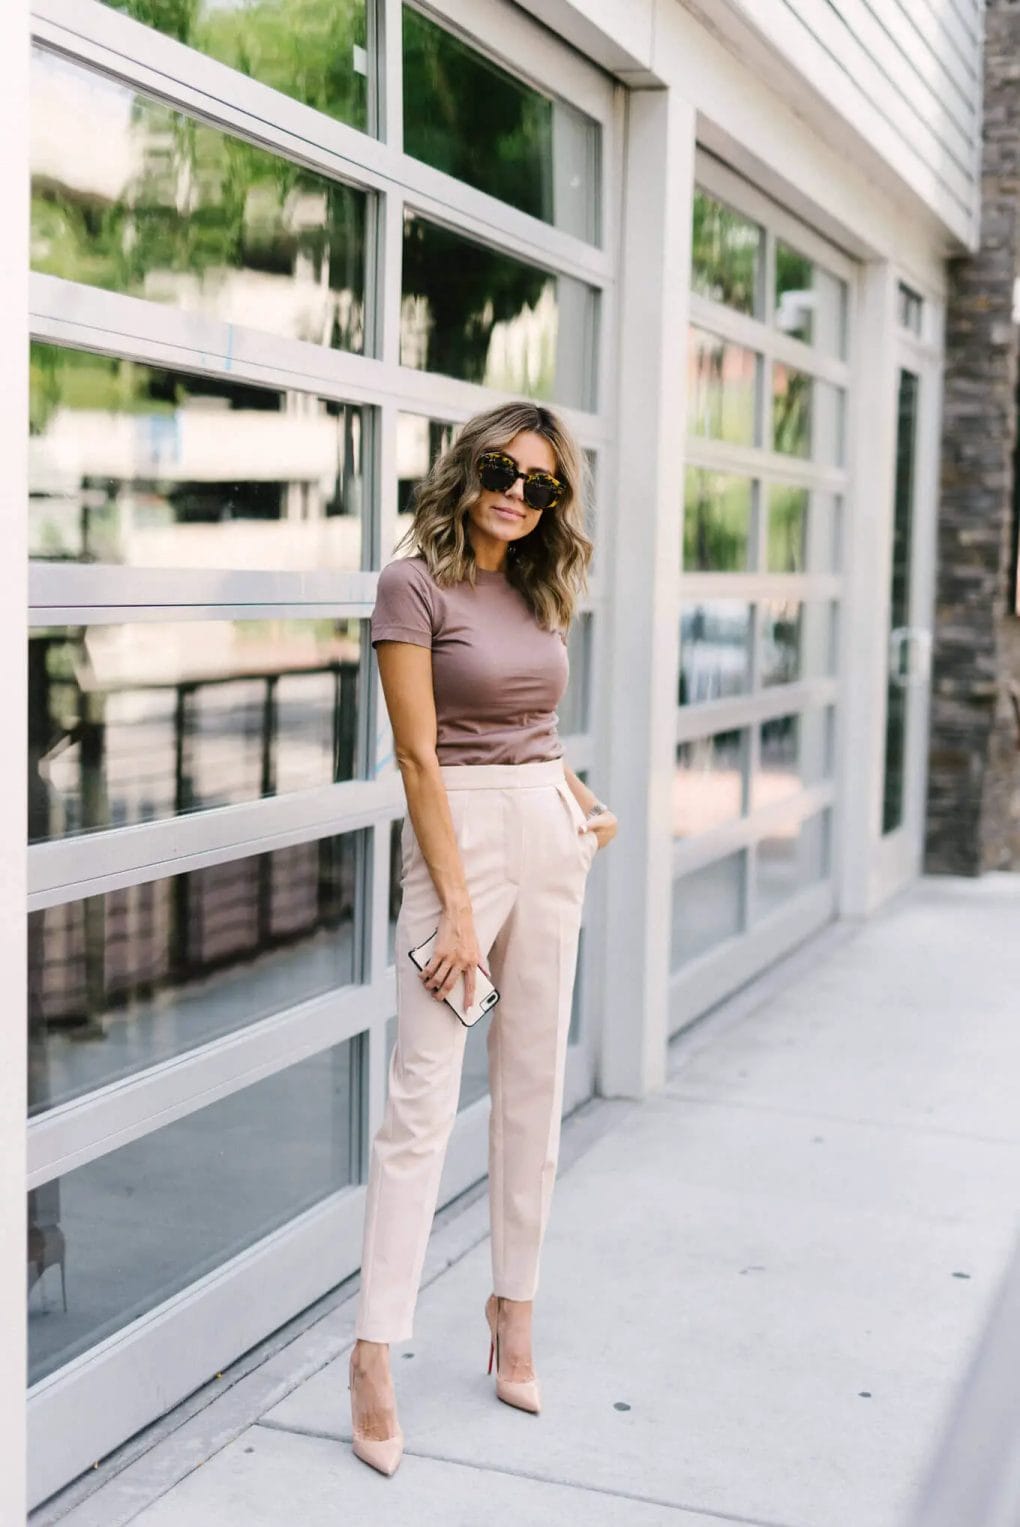 Because women look great in pants, here are some interesting designs and outfits with pants for women.